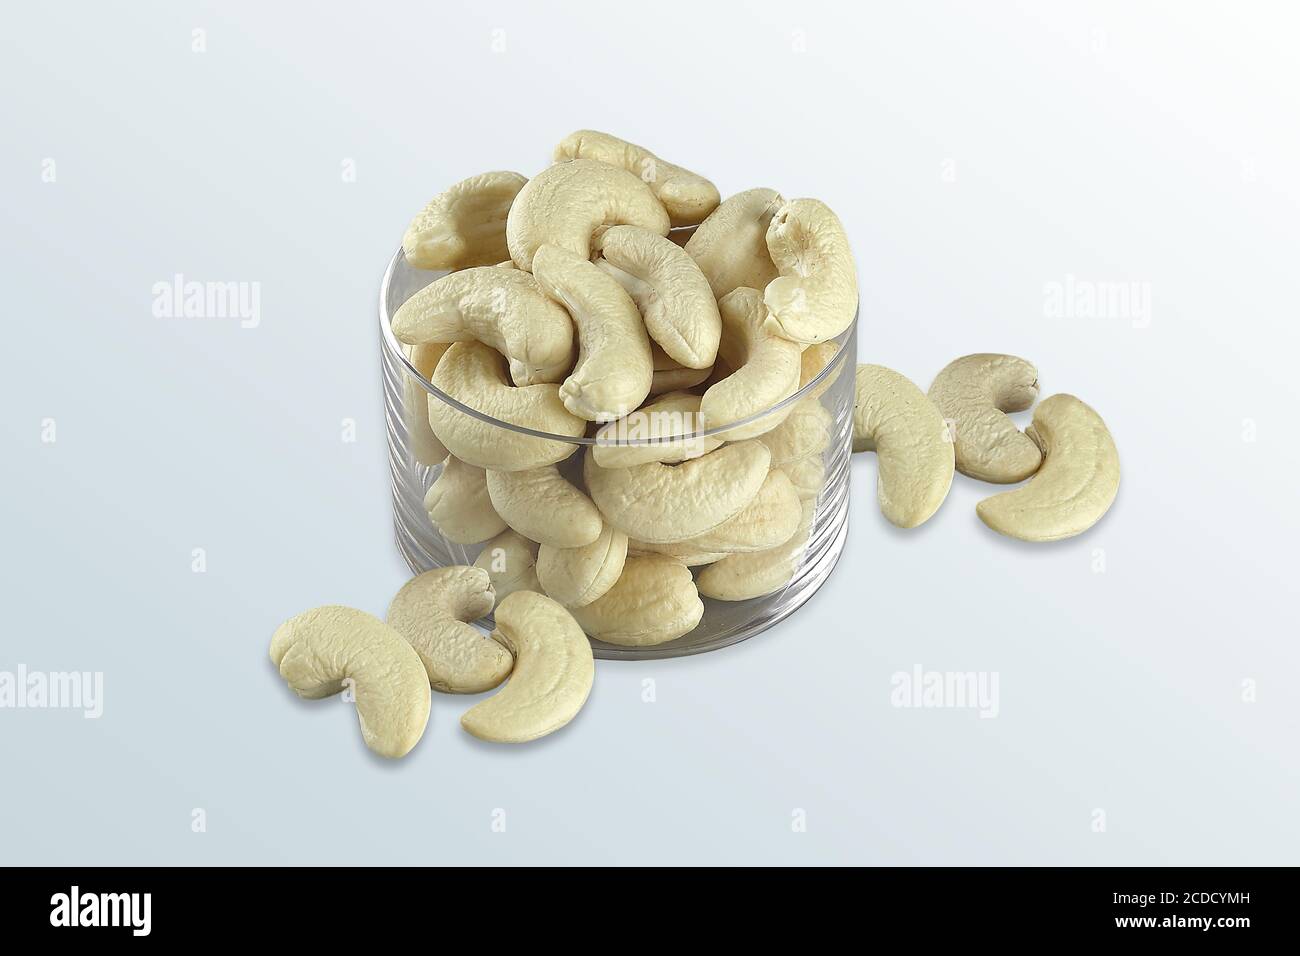 Cashew nuts in the glass bowl, Set of delicious cashew nuts, cashew grain with salt ready to eat, Glass bowl with cashew nuts, Selective focus, Stock Photo